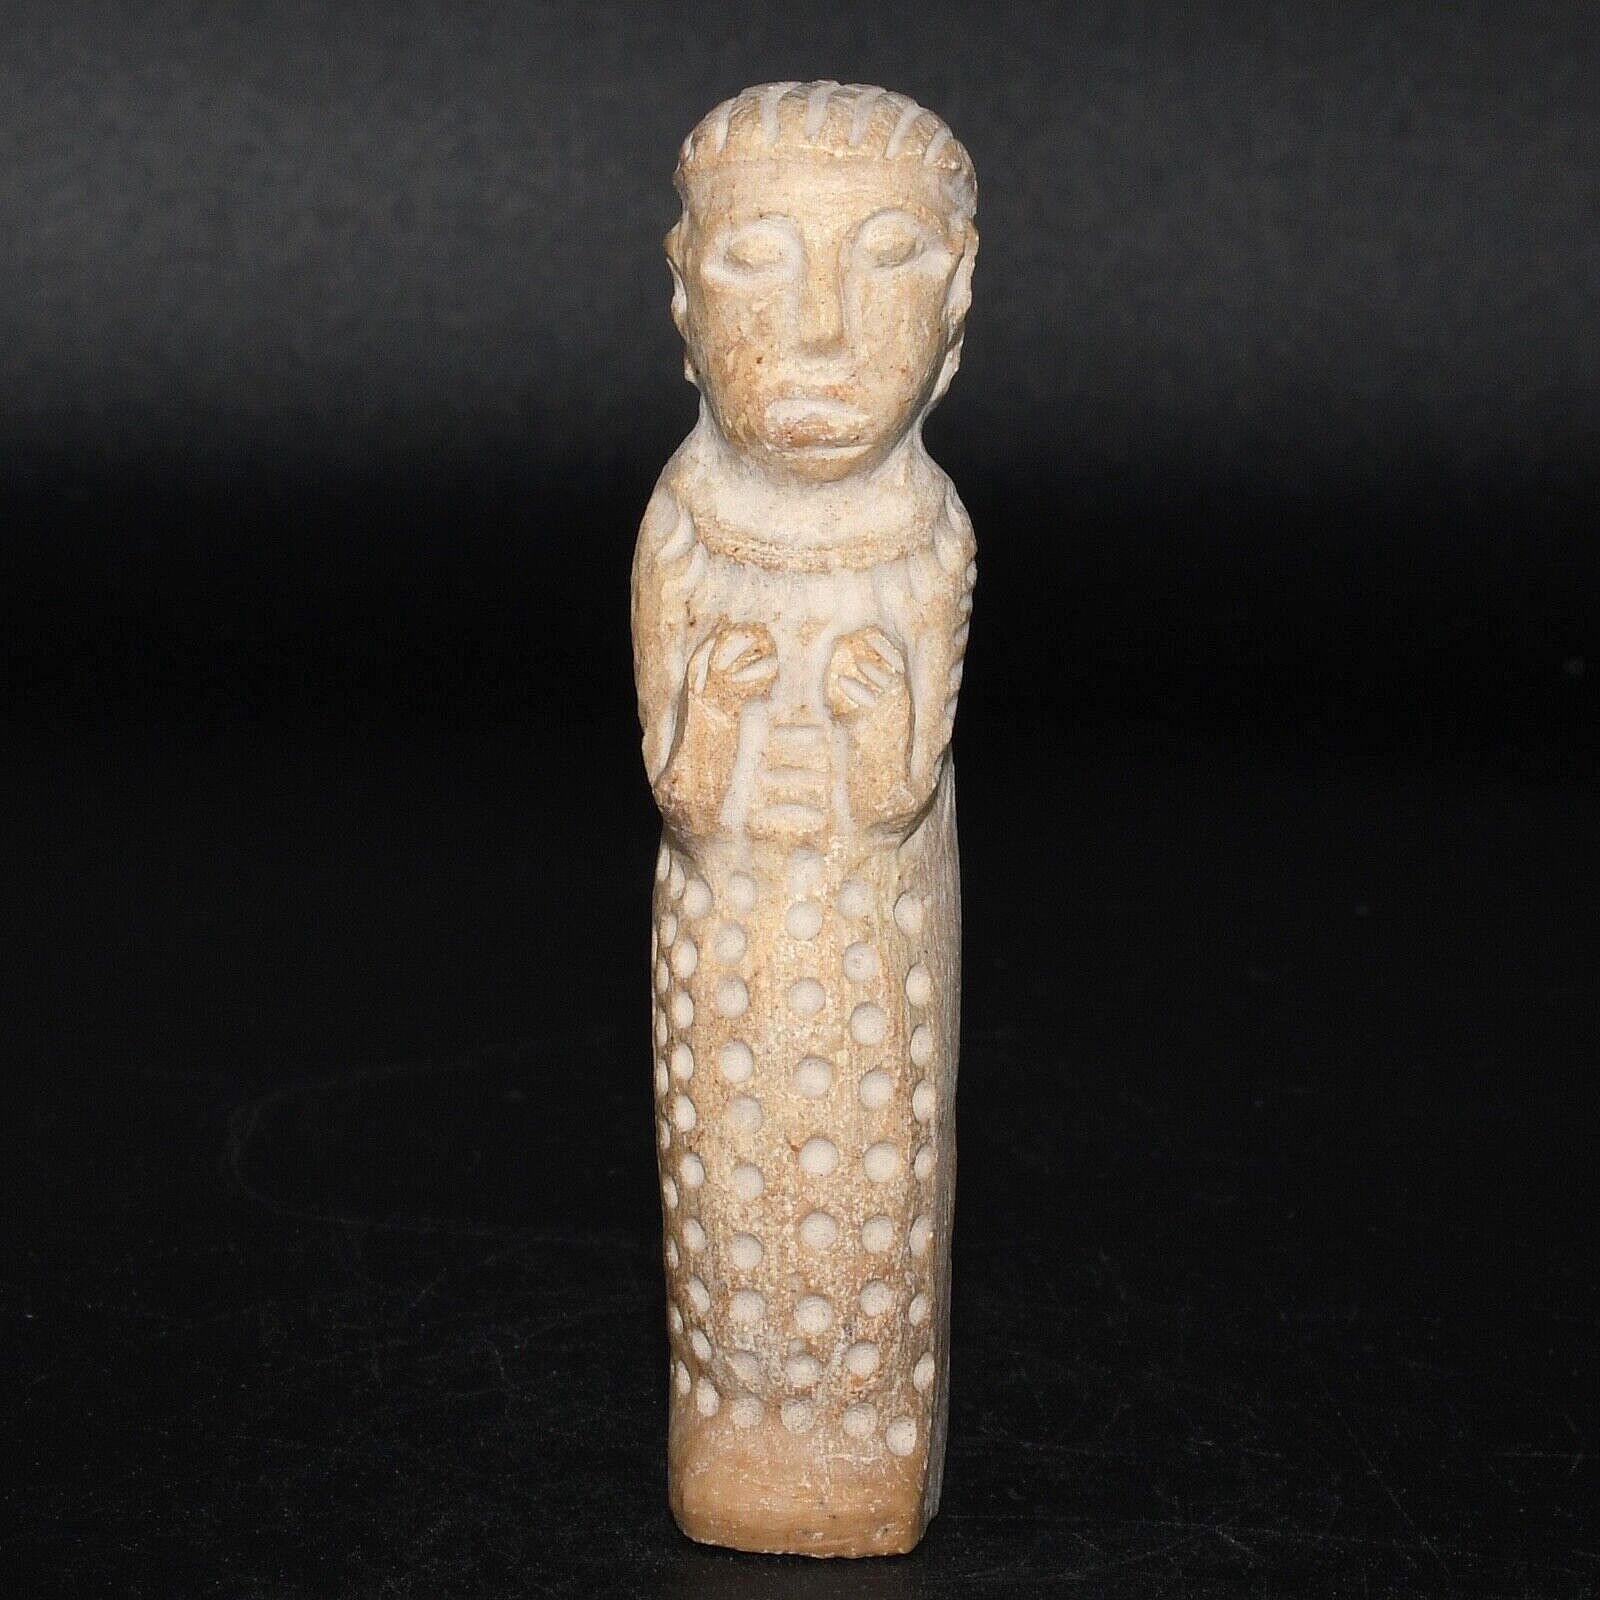 Ancient Early Bactrian Stone Idol Statue of Male Figurine Circa 2500 - 1500 BC